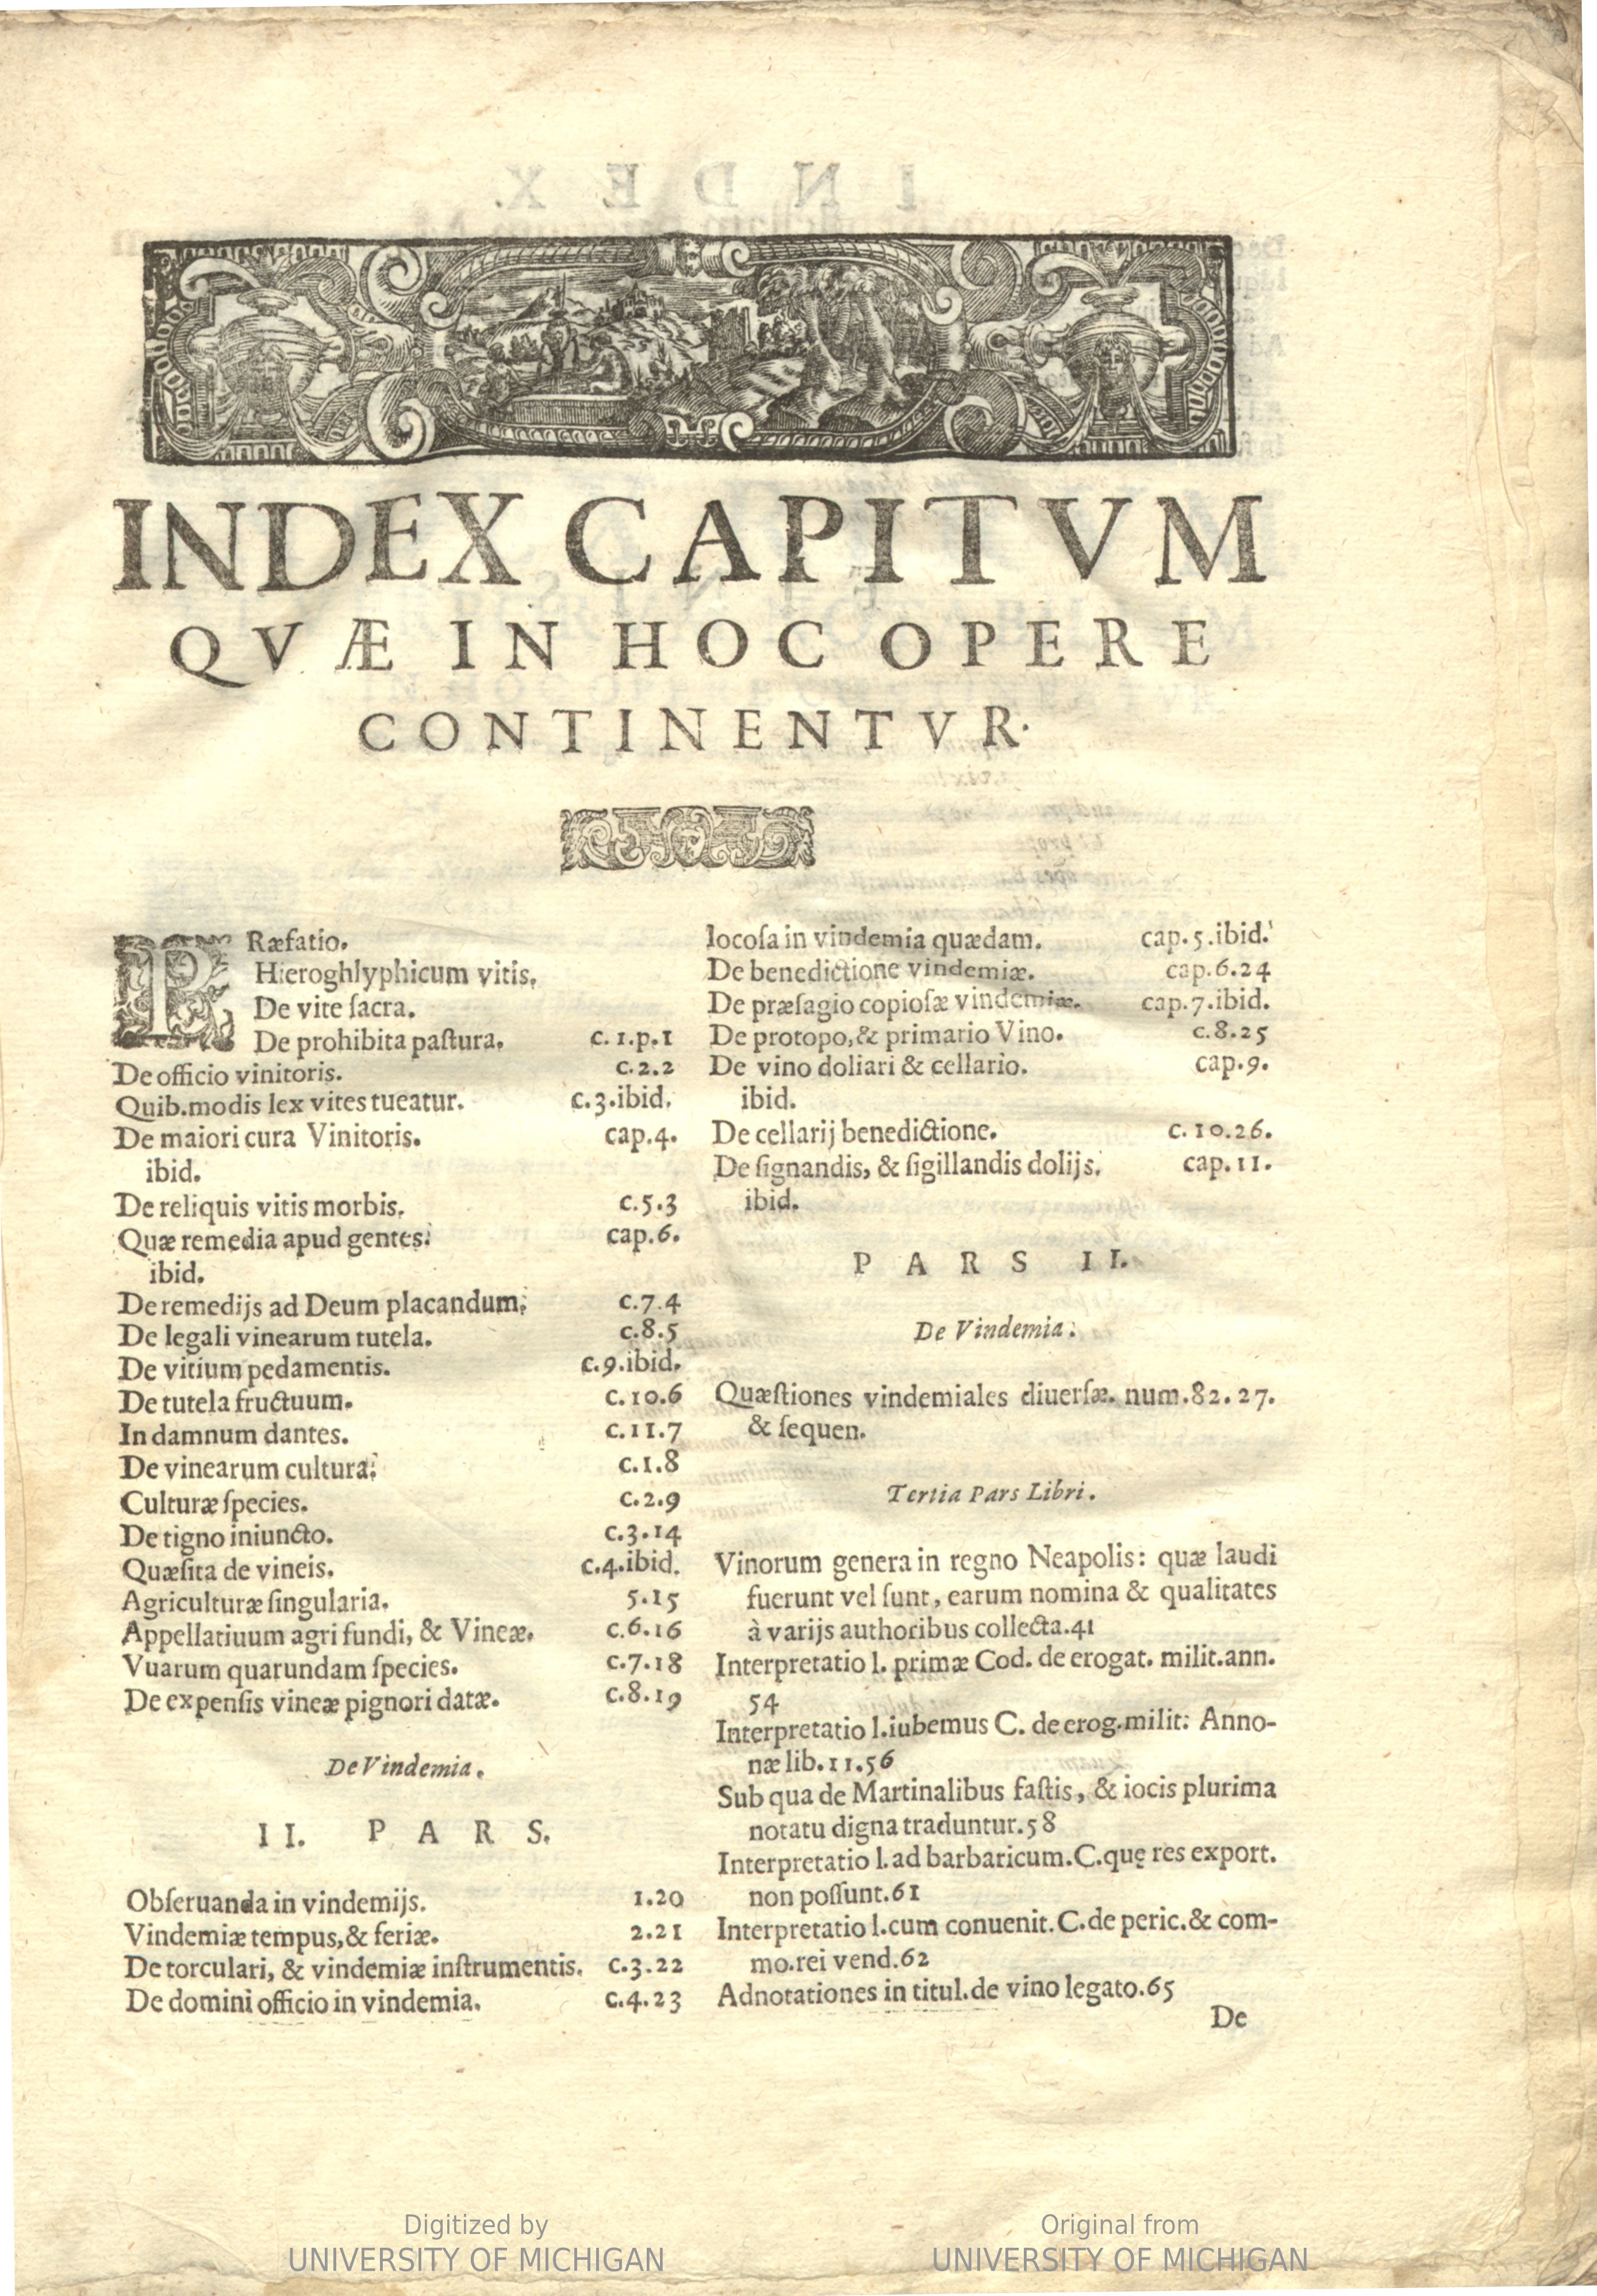 A page of an index or table of contents in two columns in Latin, relating to wine and viticulture